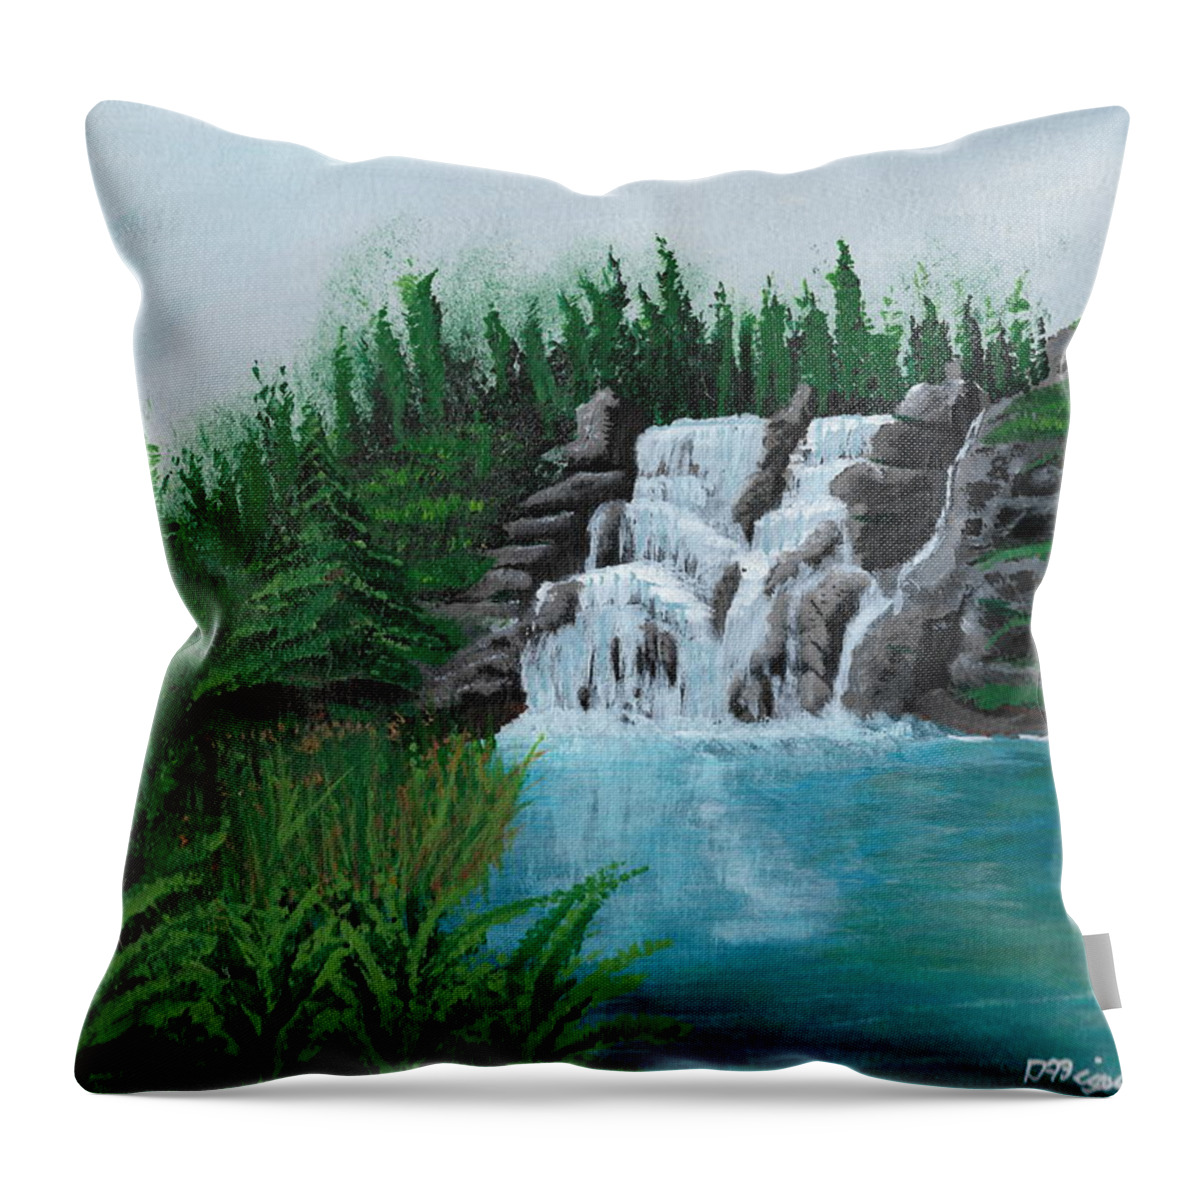 Waterfall Throw Pillow featuring the painting Waterfall On Ridge by David Bigelow